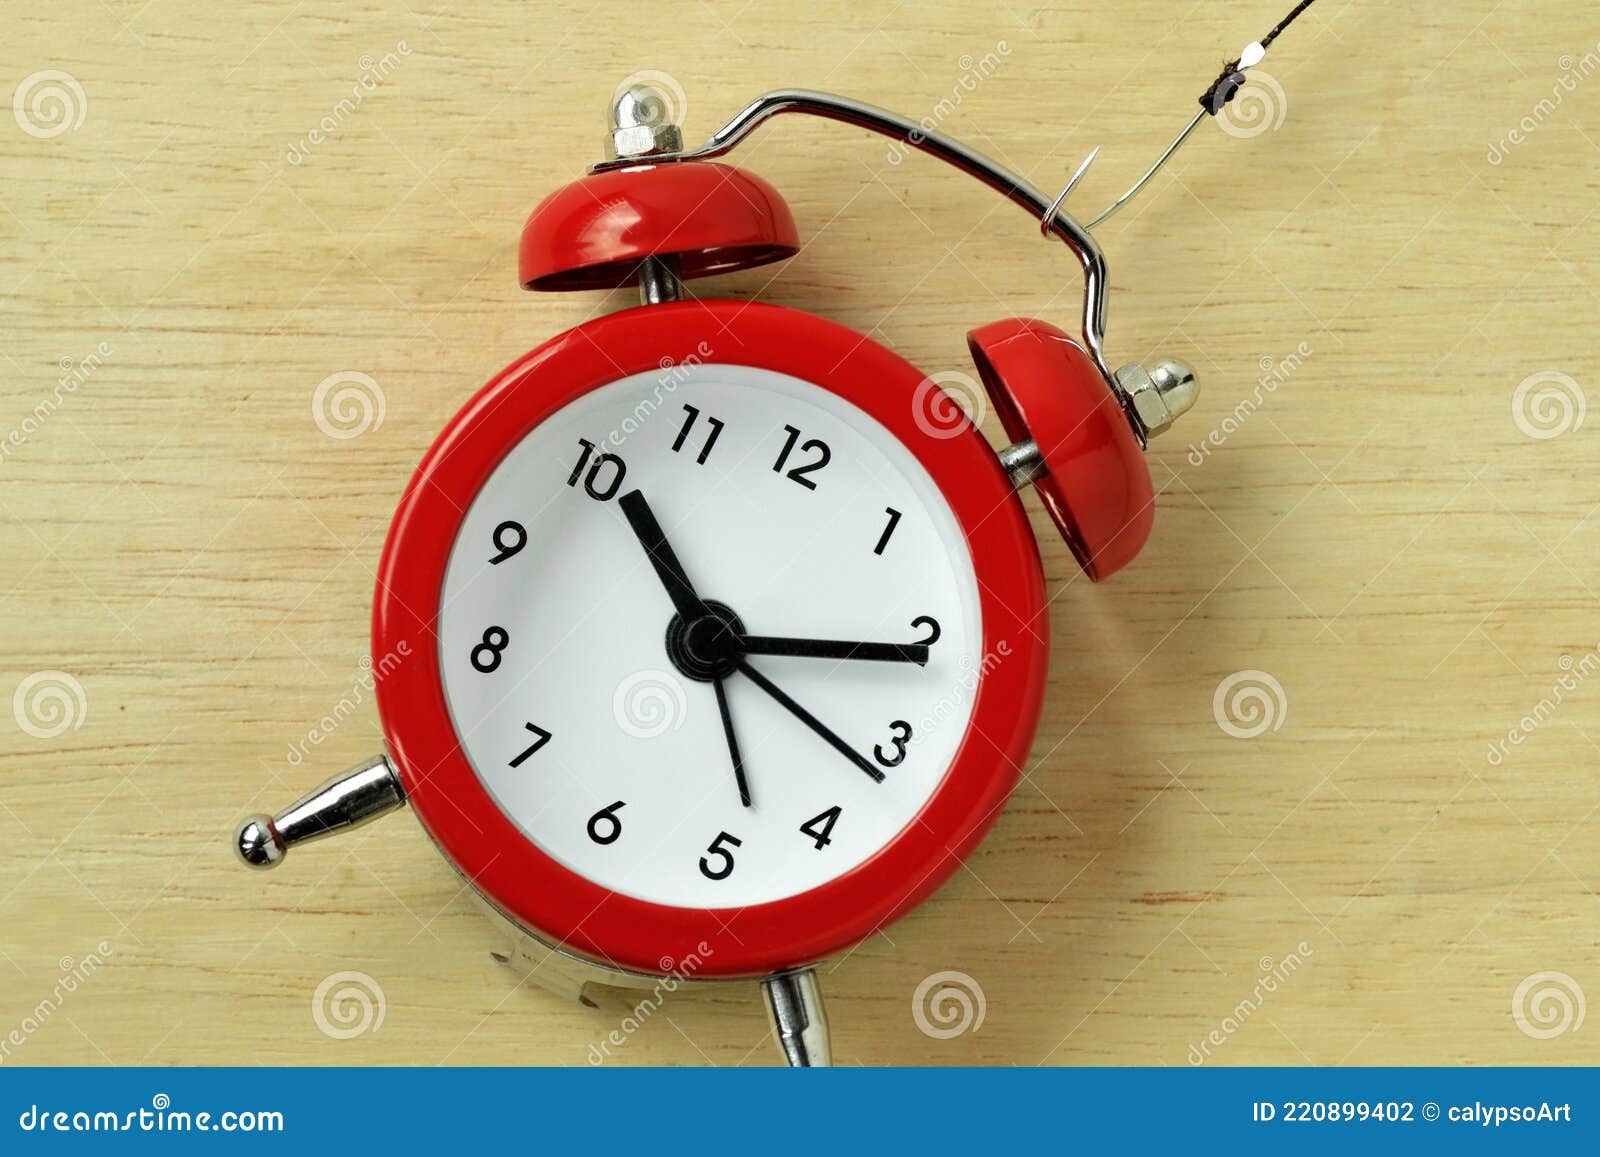 https://thumbs.dreamstime.com/z/red-alarm-clock-fishing-hook-concept-stealing-time-220899402.jpg